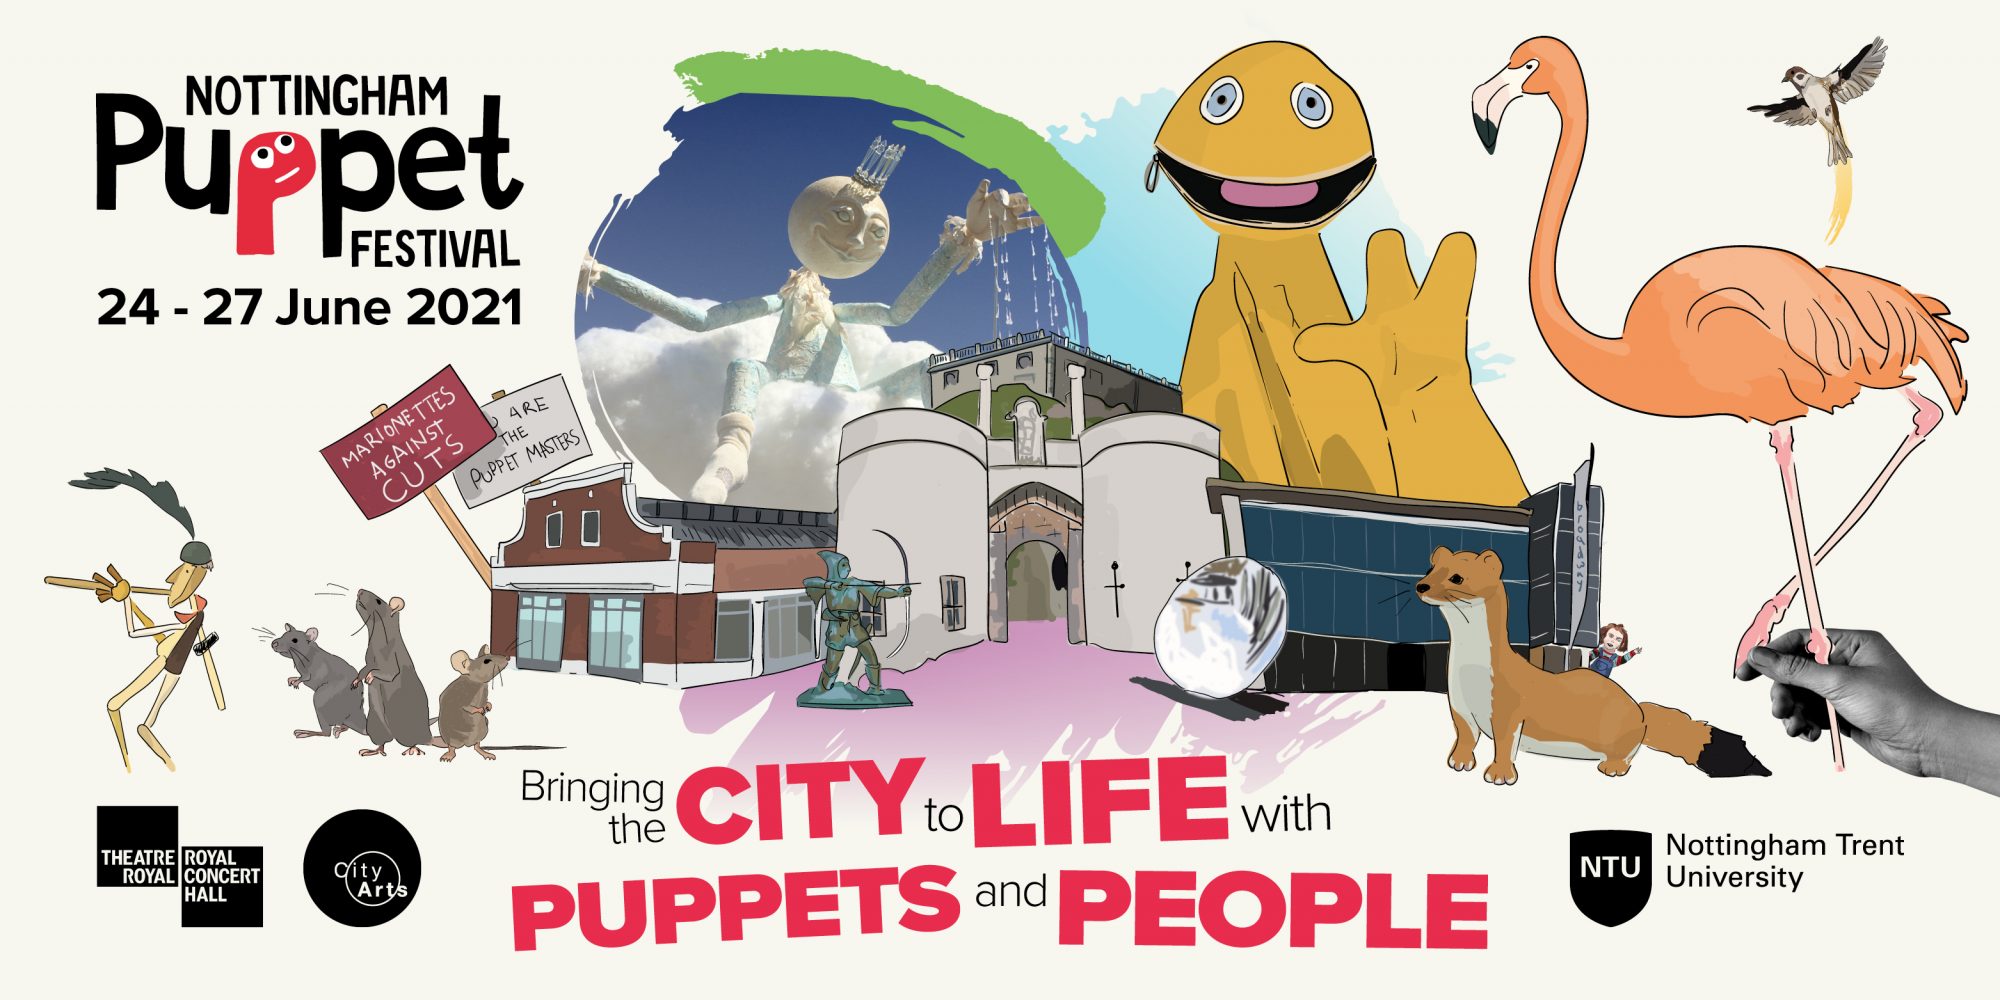 Nottingham Puppet Festival - 24-27 June 2021 - Bringing the City to Life with Puppets and People